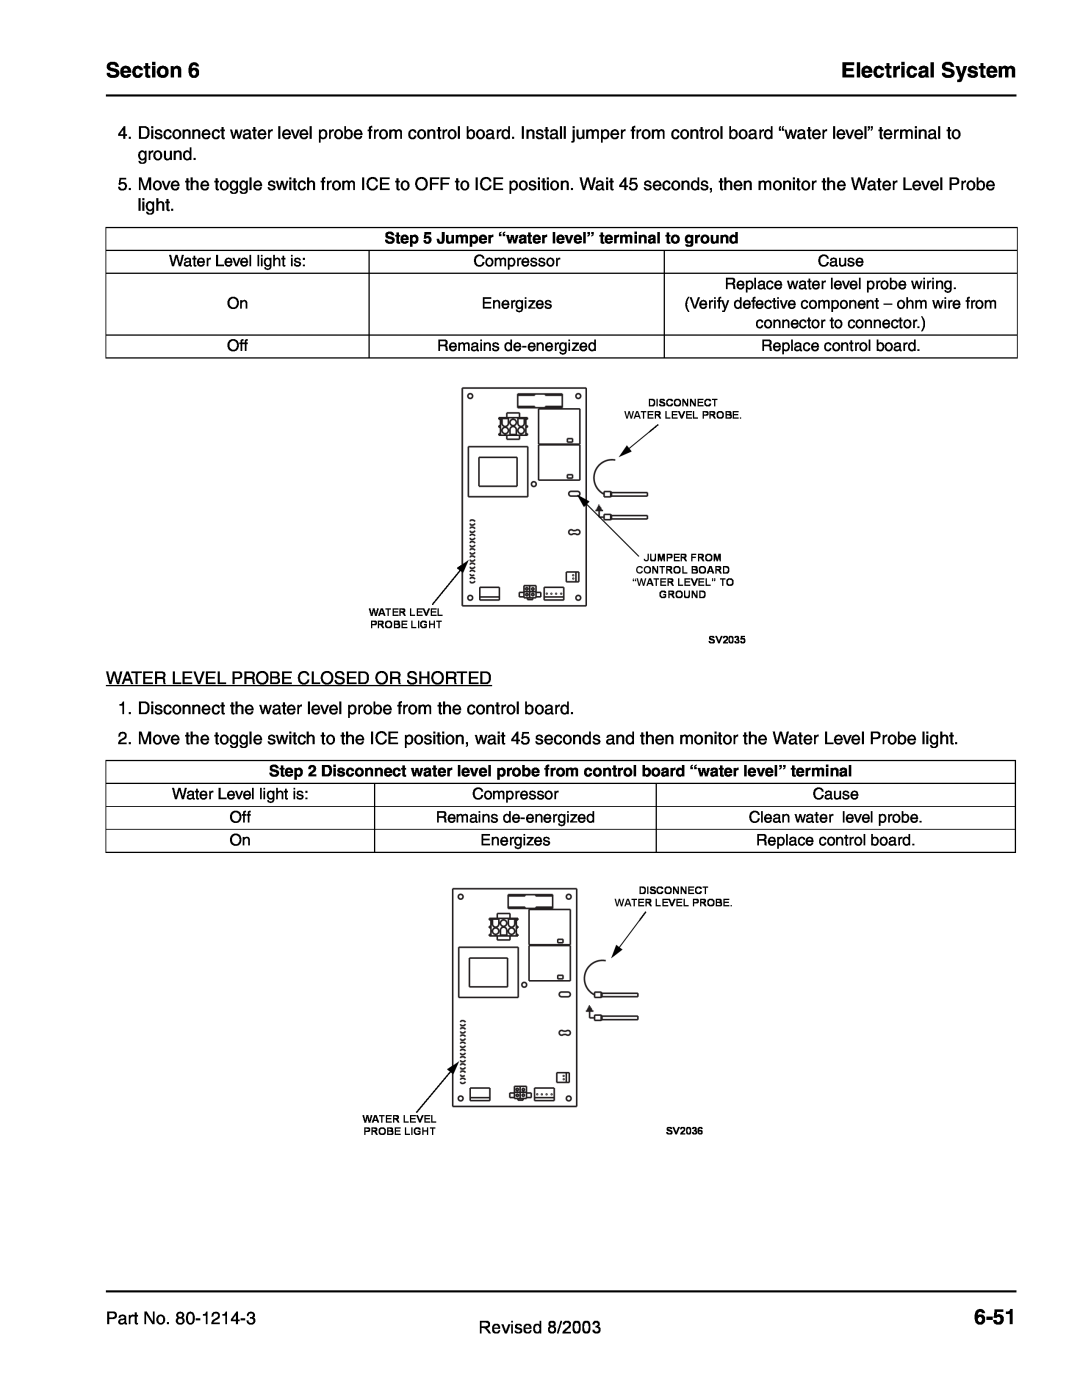 Manitowoc Ice QF0400, QF2300, QF0800, QC0700, QF2200 service manual Section, Electrical System, 6-51 